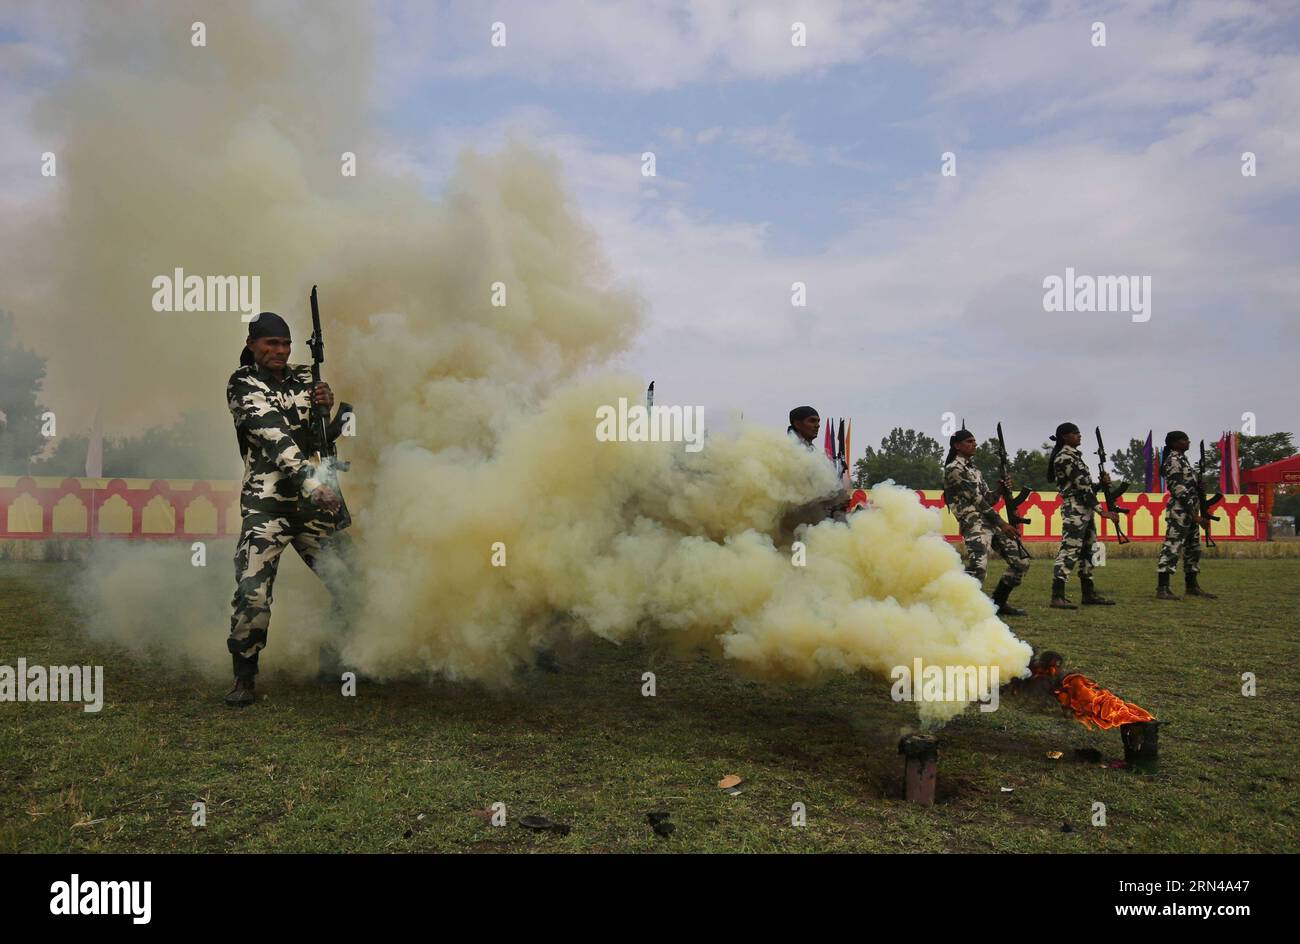 (150514) -- SRINAGAR, May 14, 2015 -- Recruits of India s Central Reserve Police Force (CRPF) show their skills during a passing-out parade at a training center on the outskirts of Srinagar, the summer capital of Indian-controlled Kashmir, May 14, 2015. A total of 341 recruits were formally inducted into the India s CRPF after completing nine months of rigorous training in physical fitness, weapon handling, commando operations and counter insurgency, a CRPF spokesman said. ) (azp) KASHMIR-SRINAGAR-PASSING-OUT PARADE JavedxDar PUBLICATIONxNOTxINxCHN   150514 Srinagar May 14 2015 recruits of Ind Stock Photo